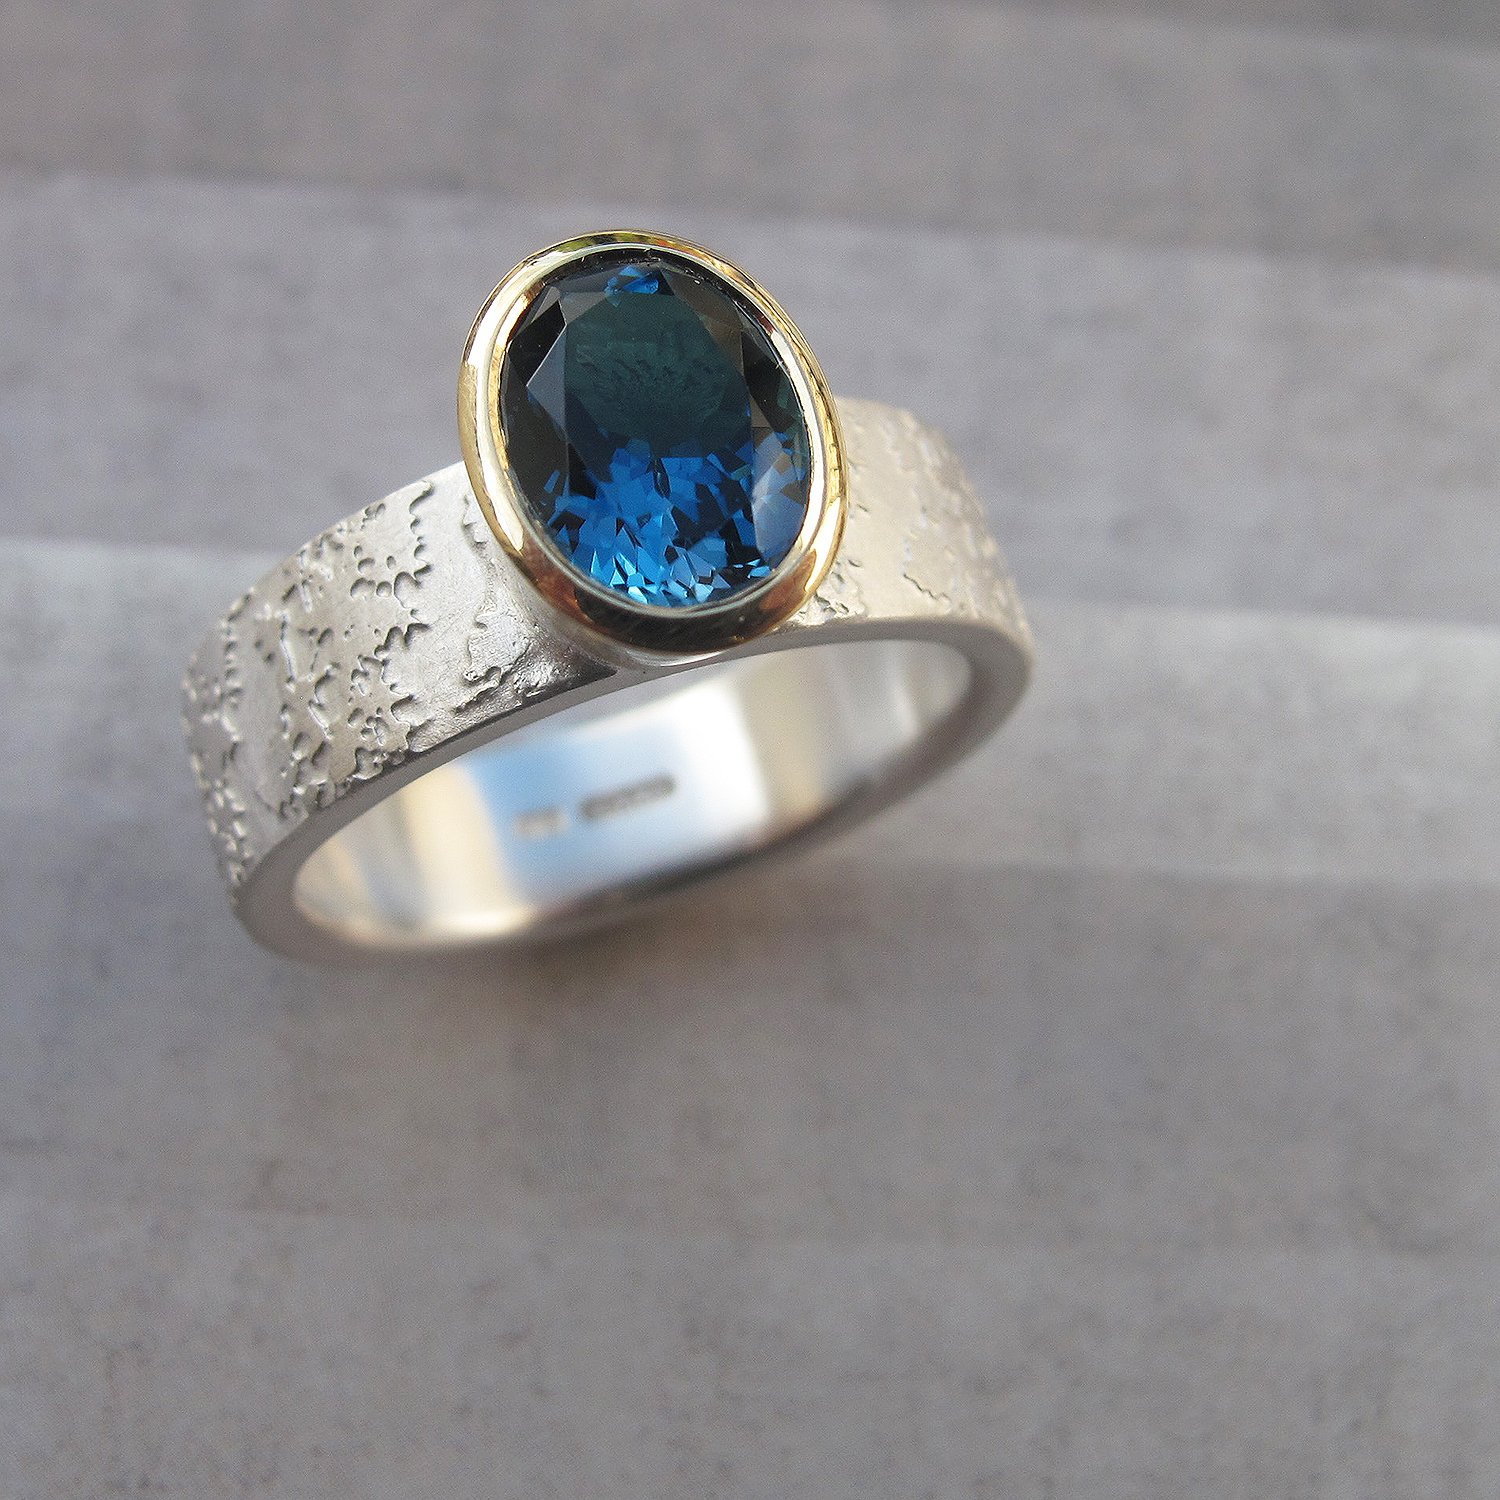 Purchase the High-Quality Men's Sapphire Rings | GLAMIRA.com